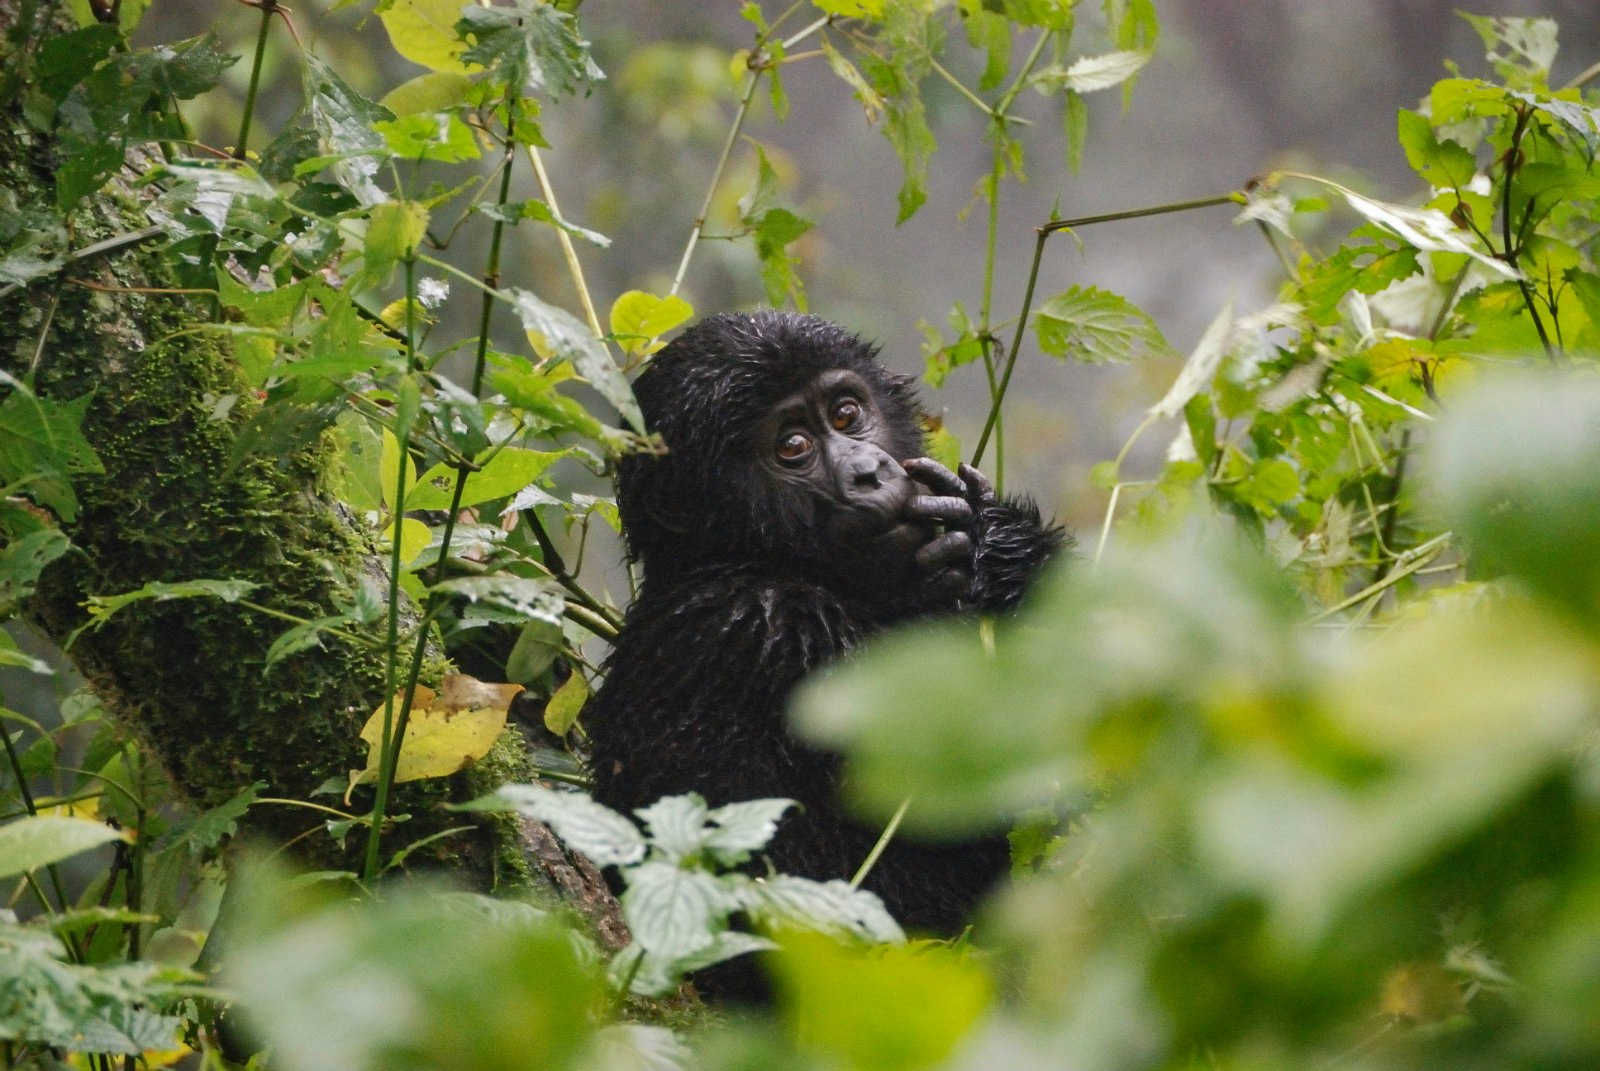 Come face to face with mountain gorillas in Rwanda © mick789 / Getty Images